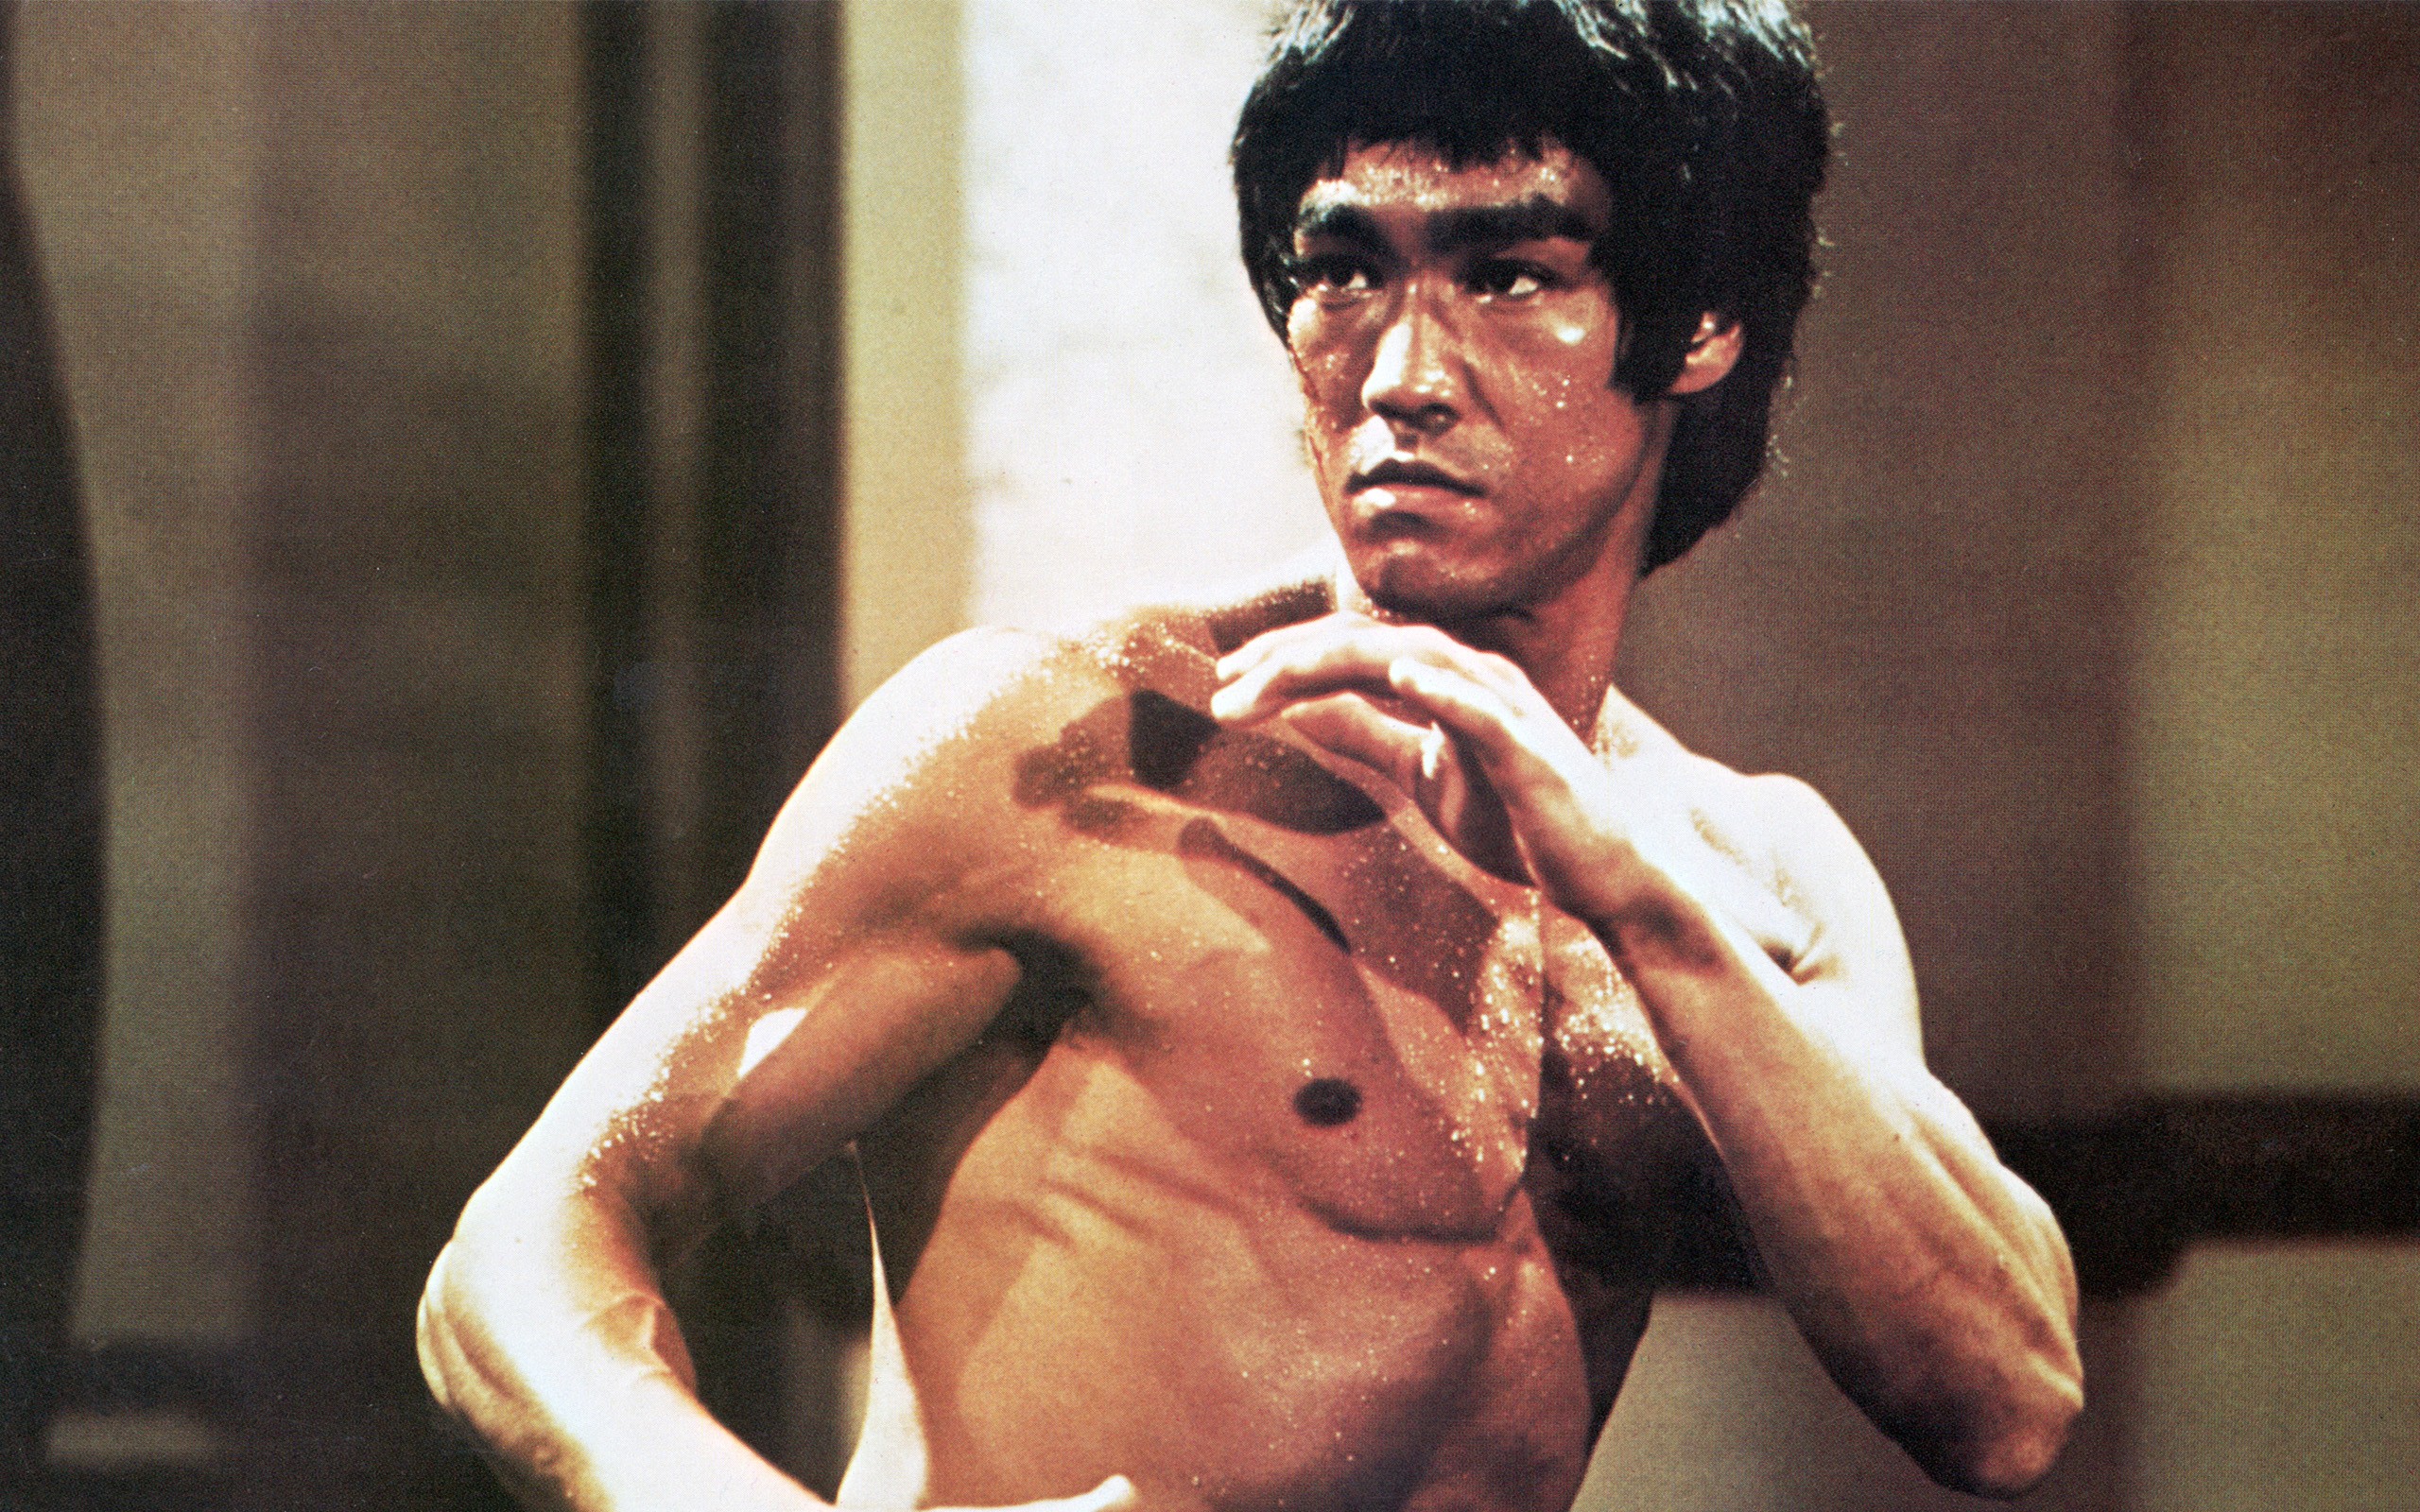 People 2560x1600 Bruce Lee actor muscles martial arts Asian movies men film stills shirtless